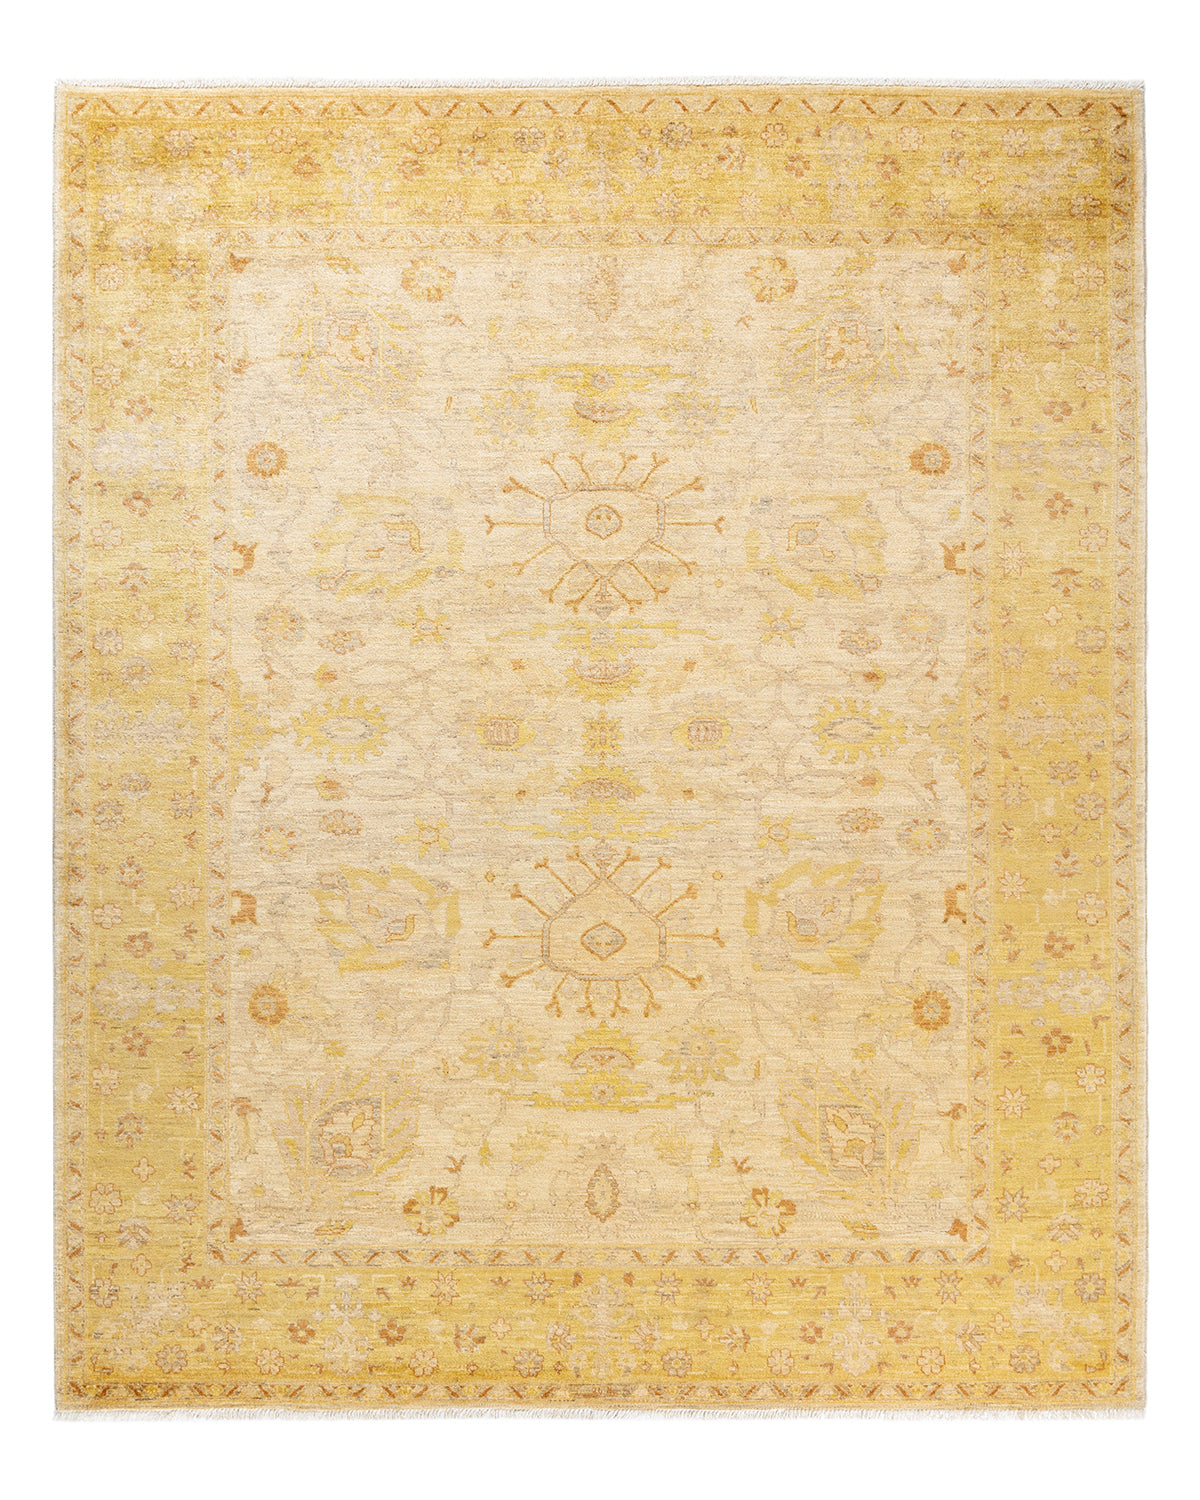 Eclectic, One-of-a-Kind Hand-Knotted Area Rug  - Ivory,  8' 2" x 9' 9"